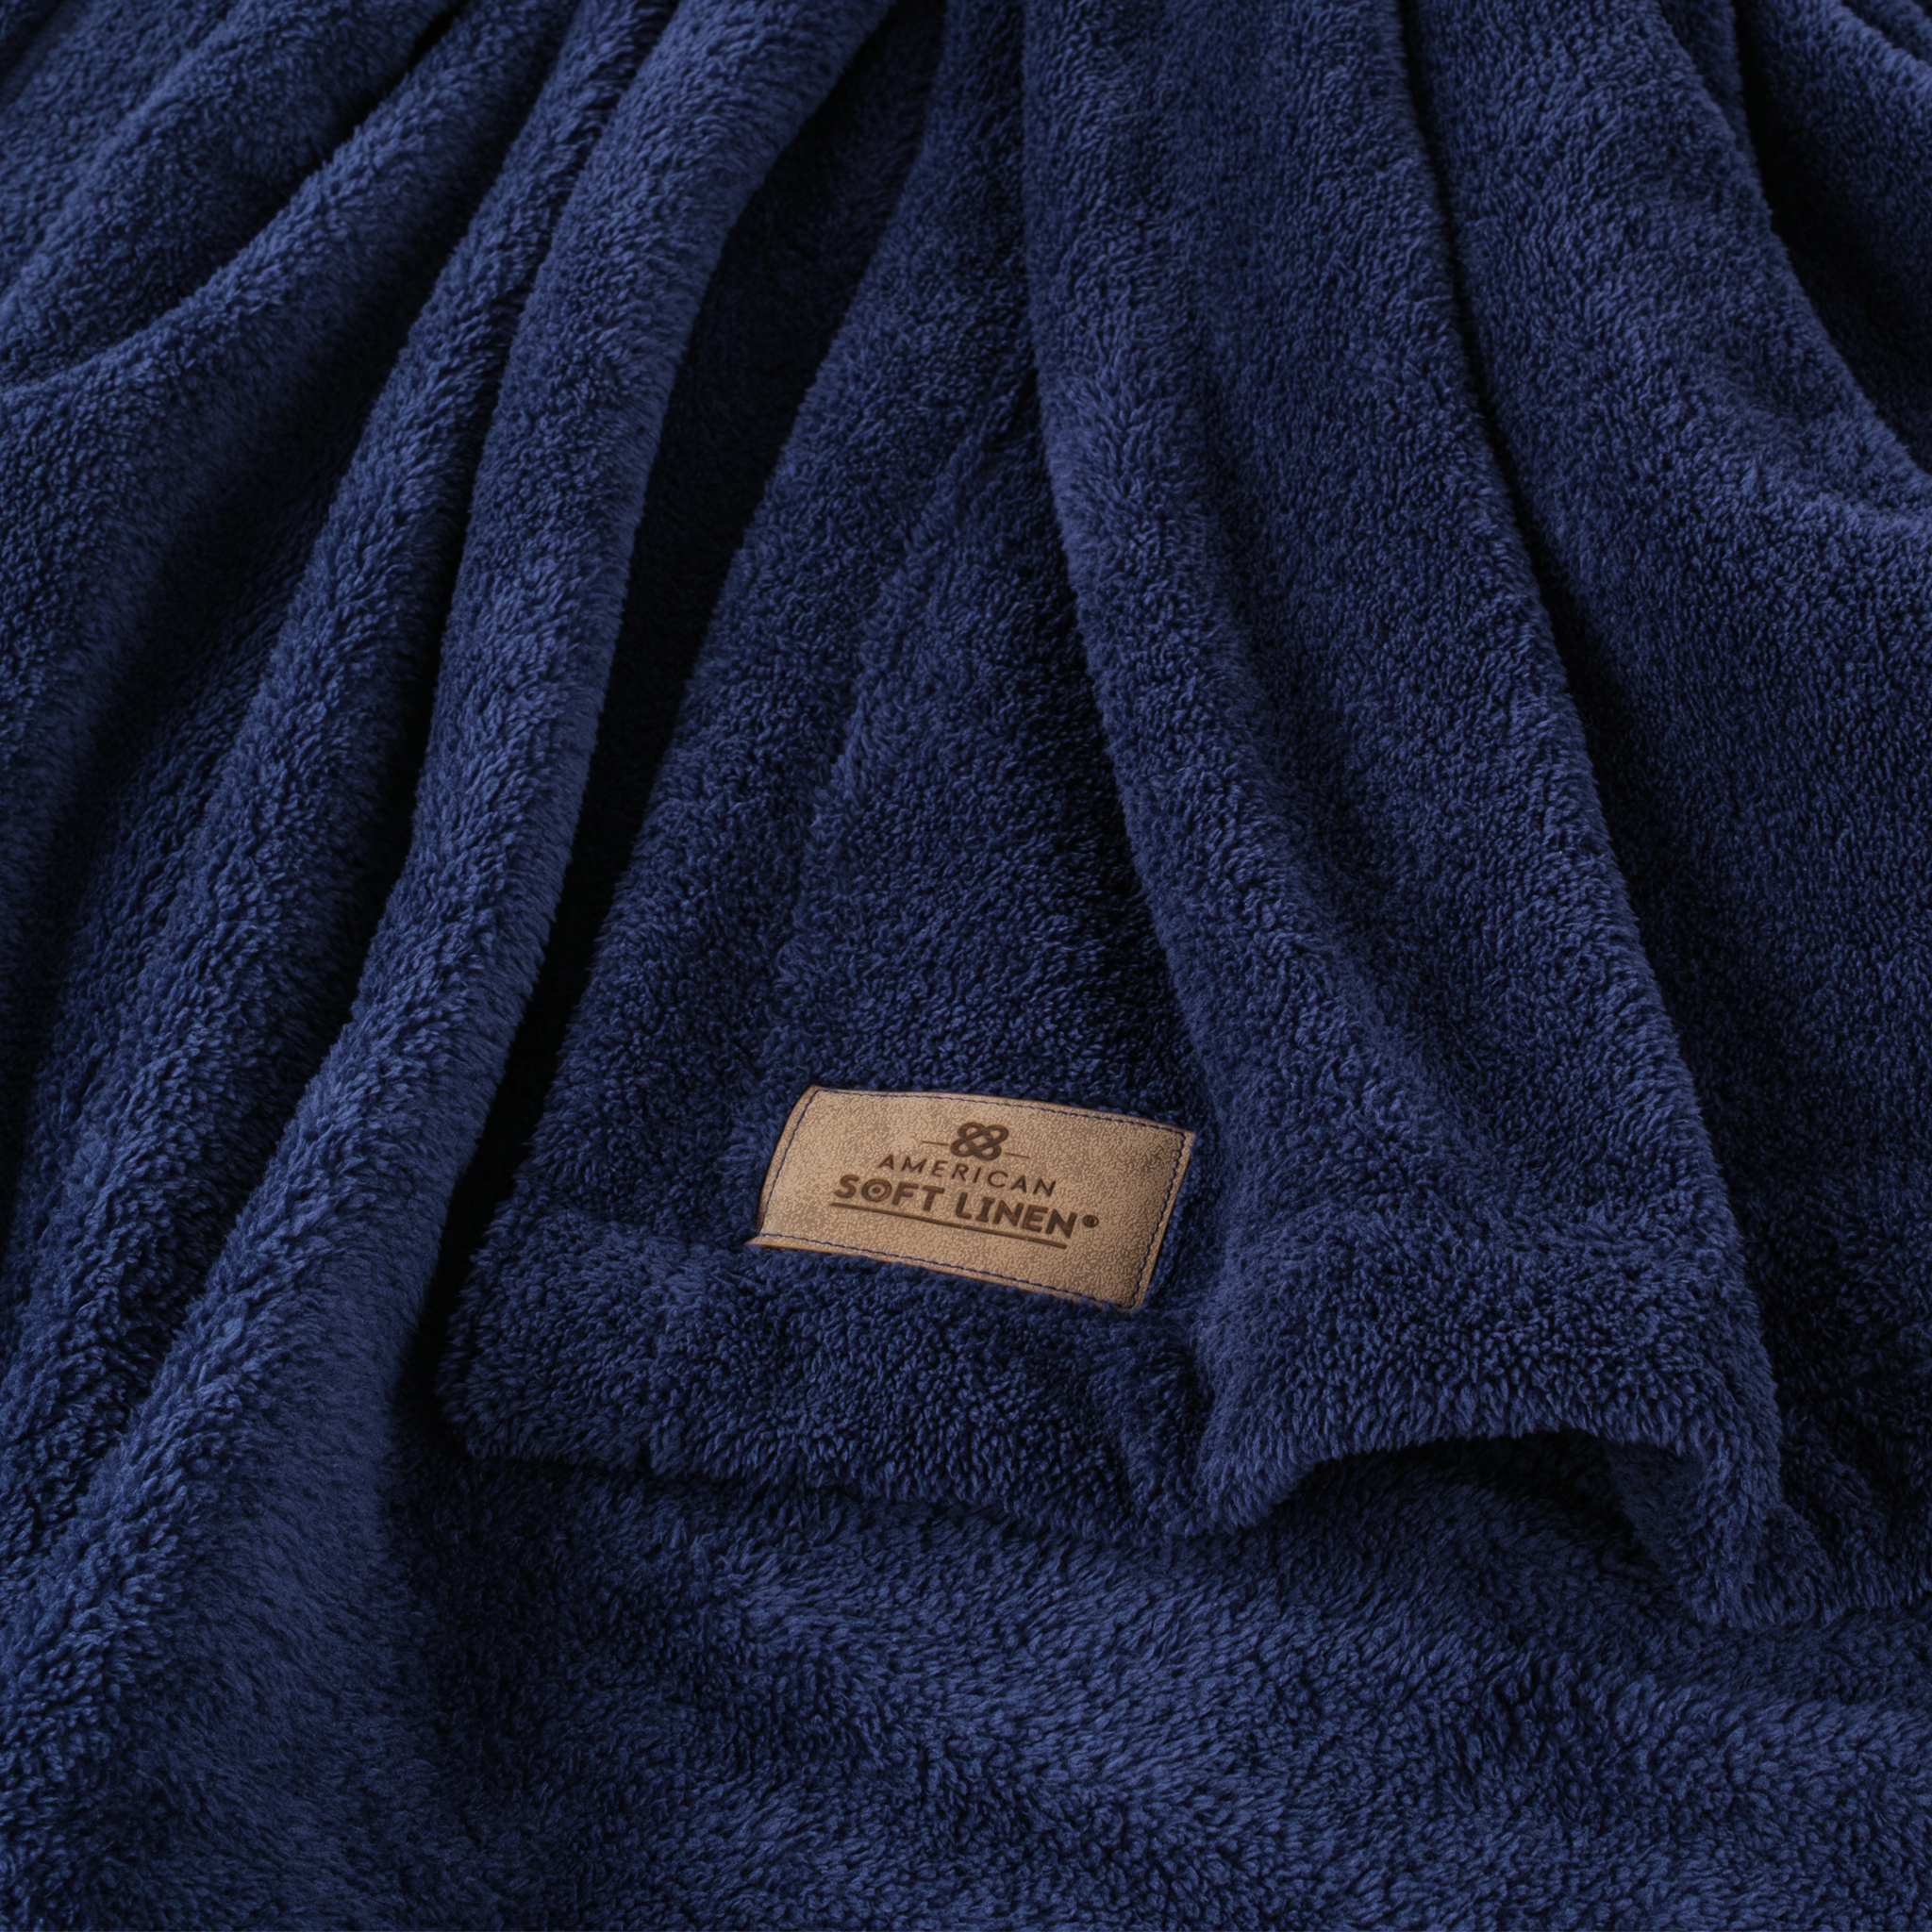 American Soft Linen - Bedding Fleece Blanket - Twin Size 60x80 inches - Navy-Blue - 4